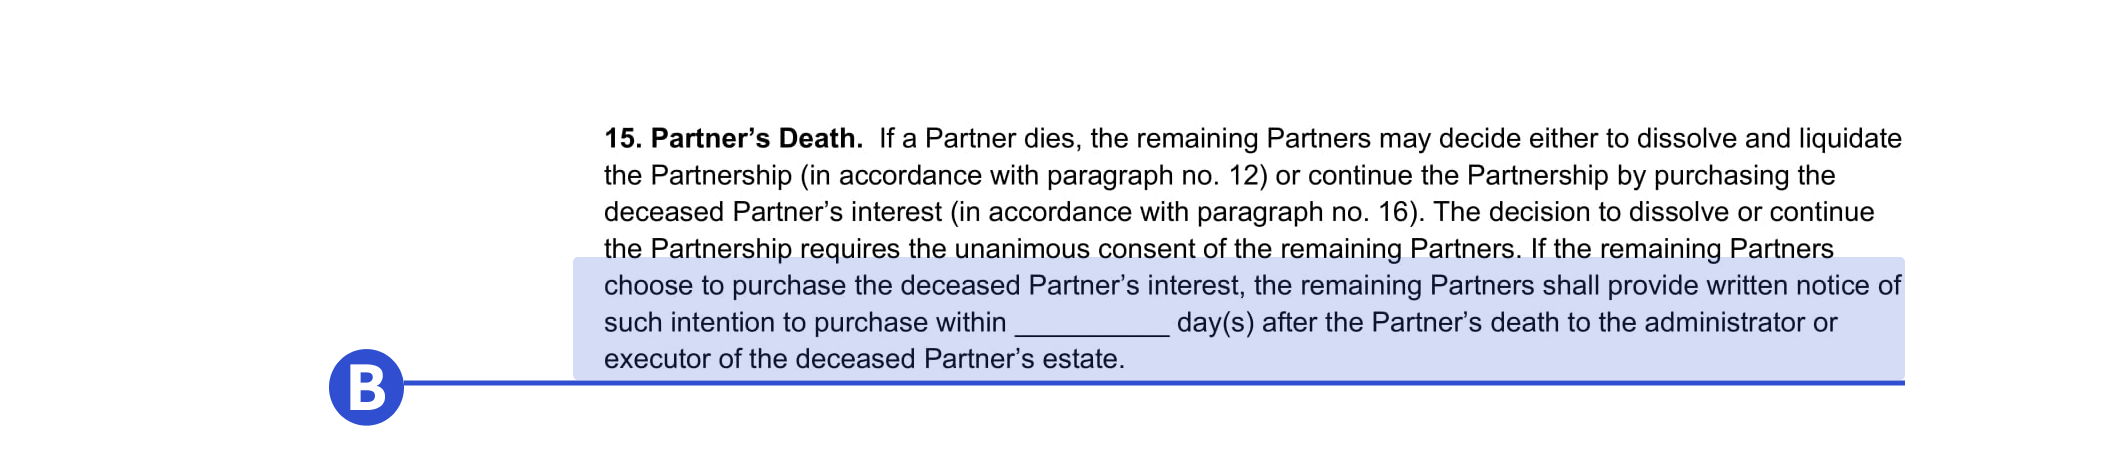 Where to include partner death details in our partnership agreement template.